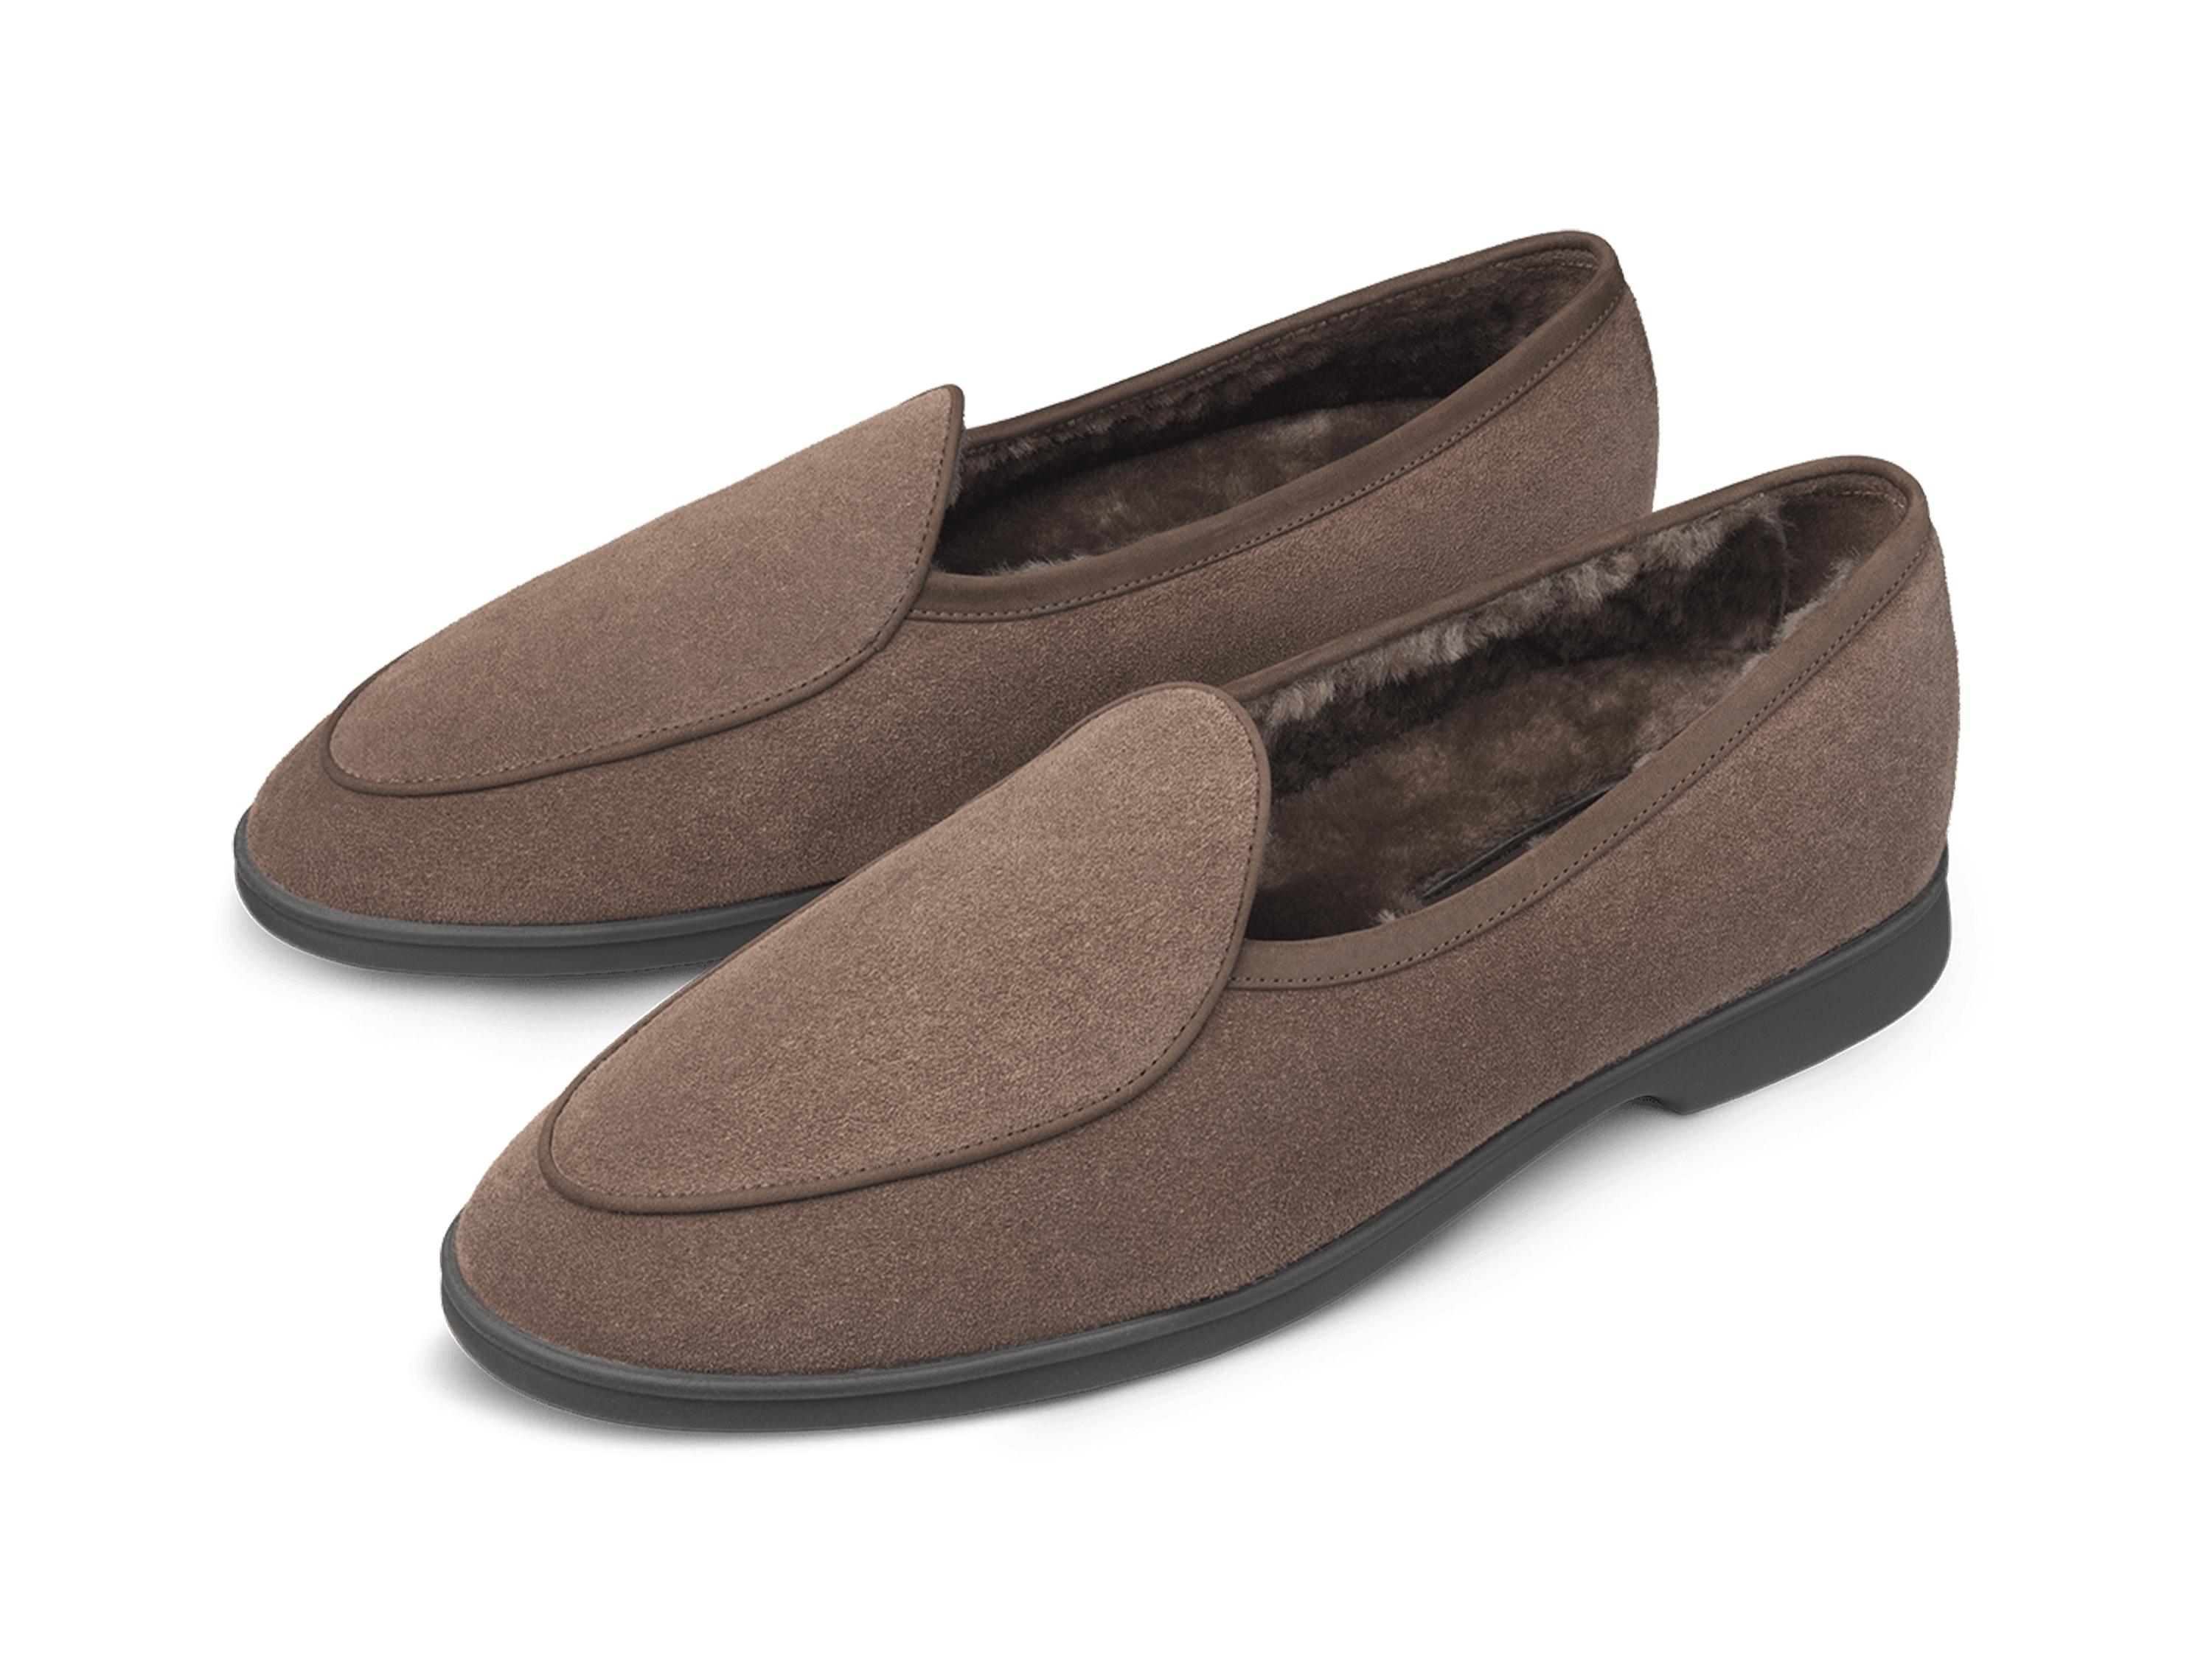 Stride Loafers in Deep Taupe Suede with Shearling Lining Dark Sole